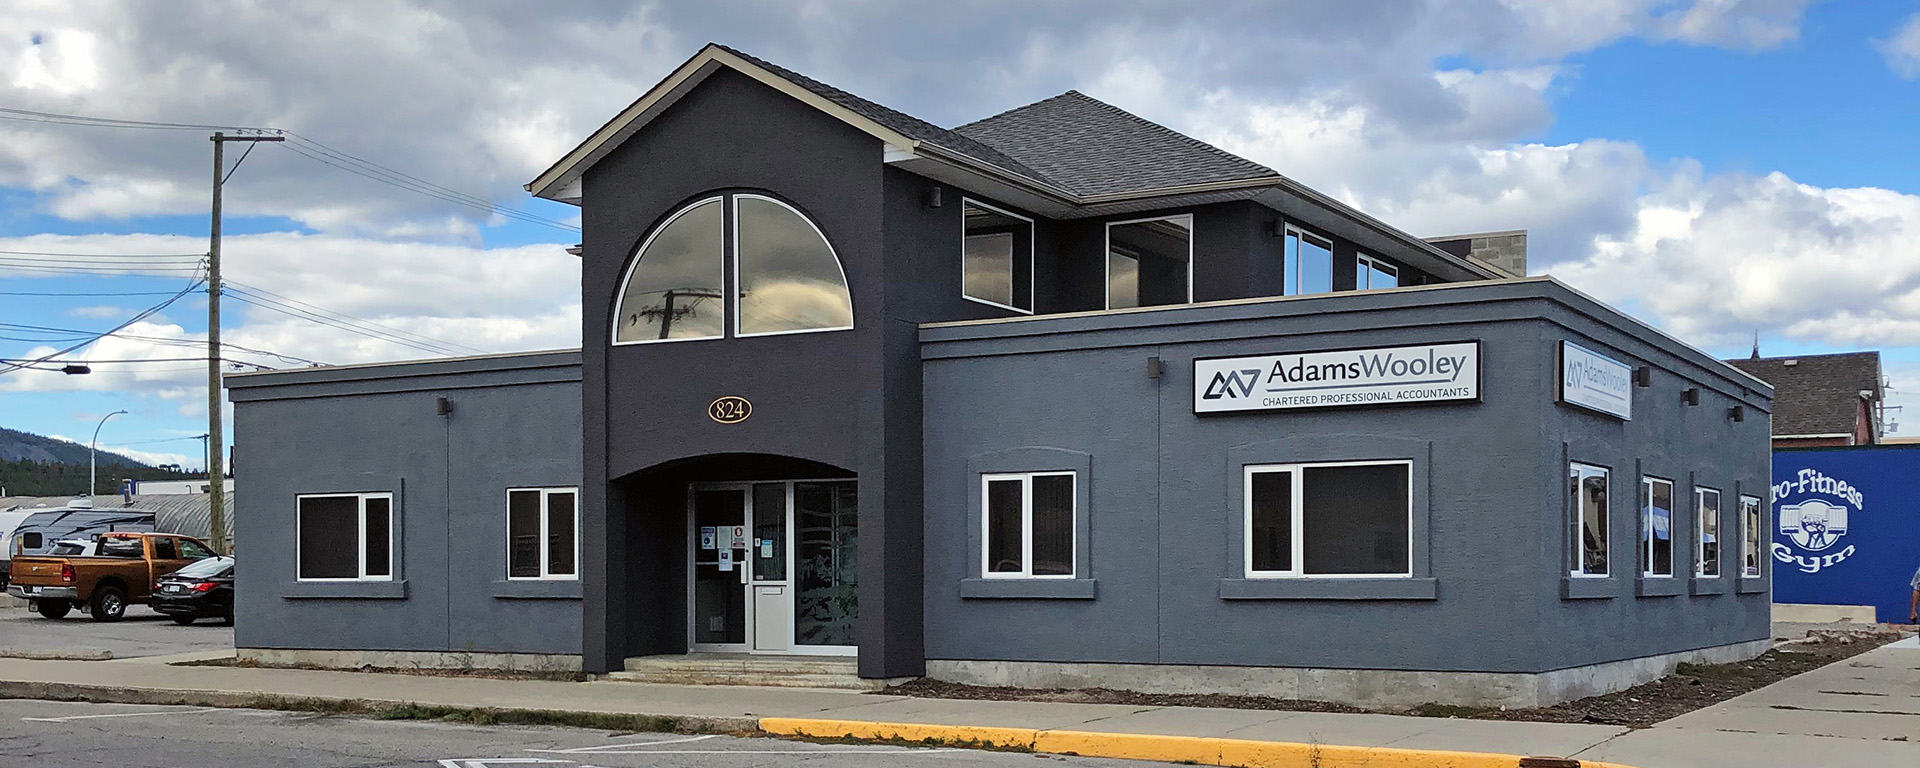 Exterior of the Adams Wooley office building 